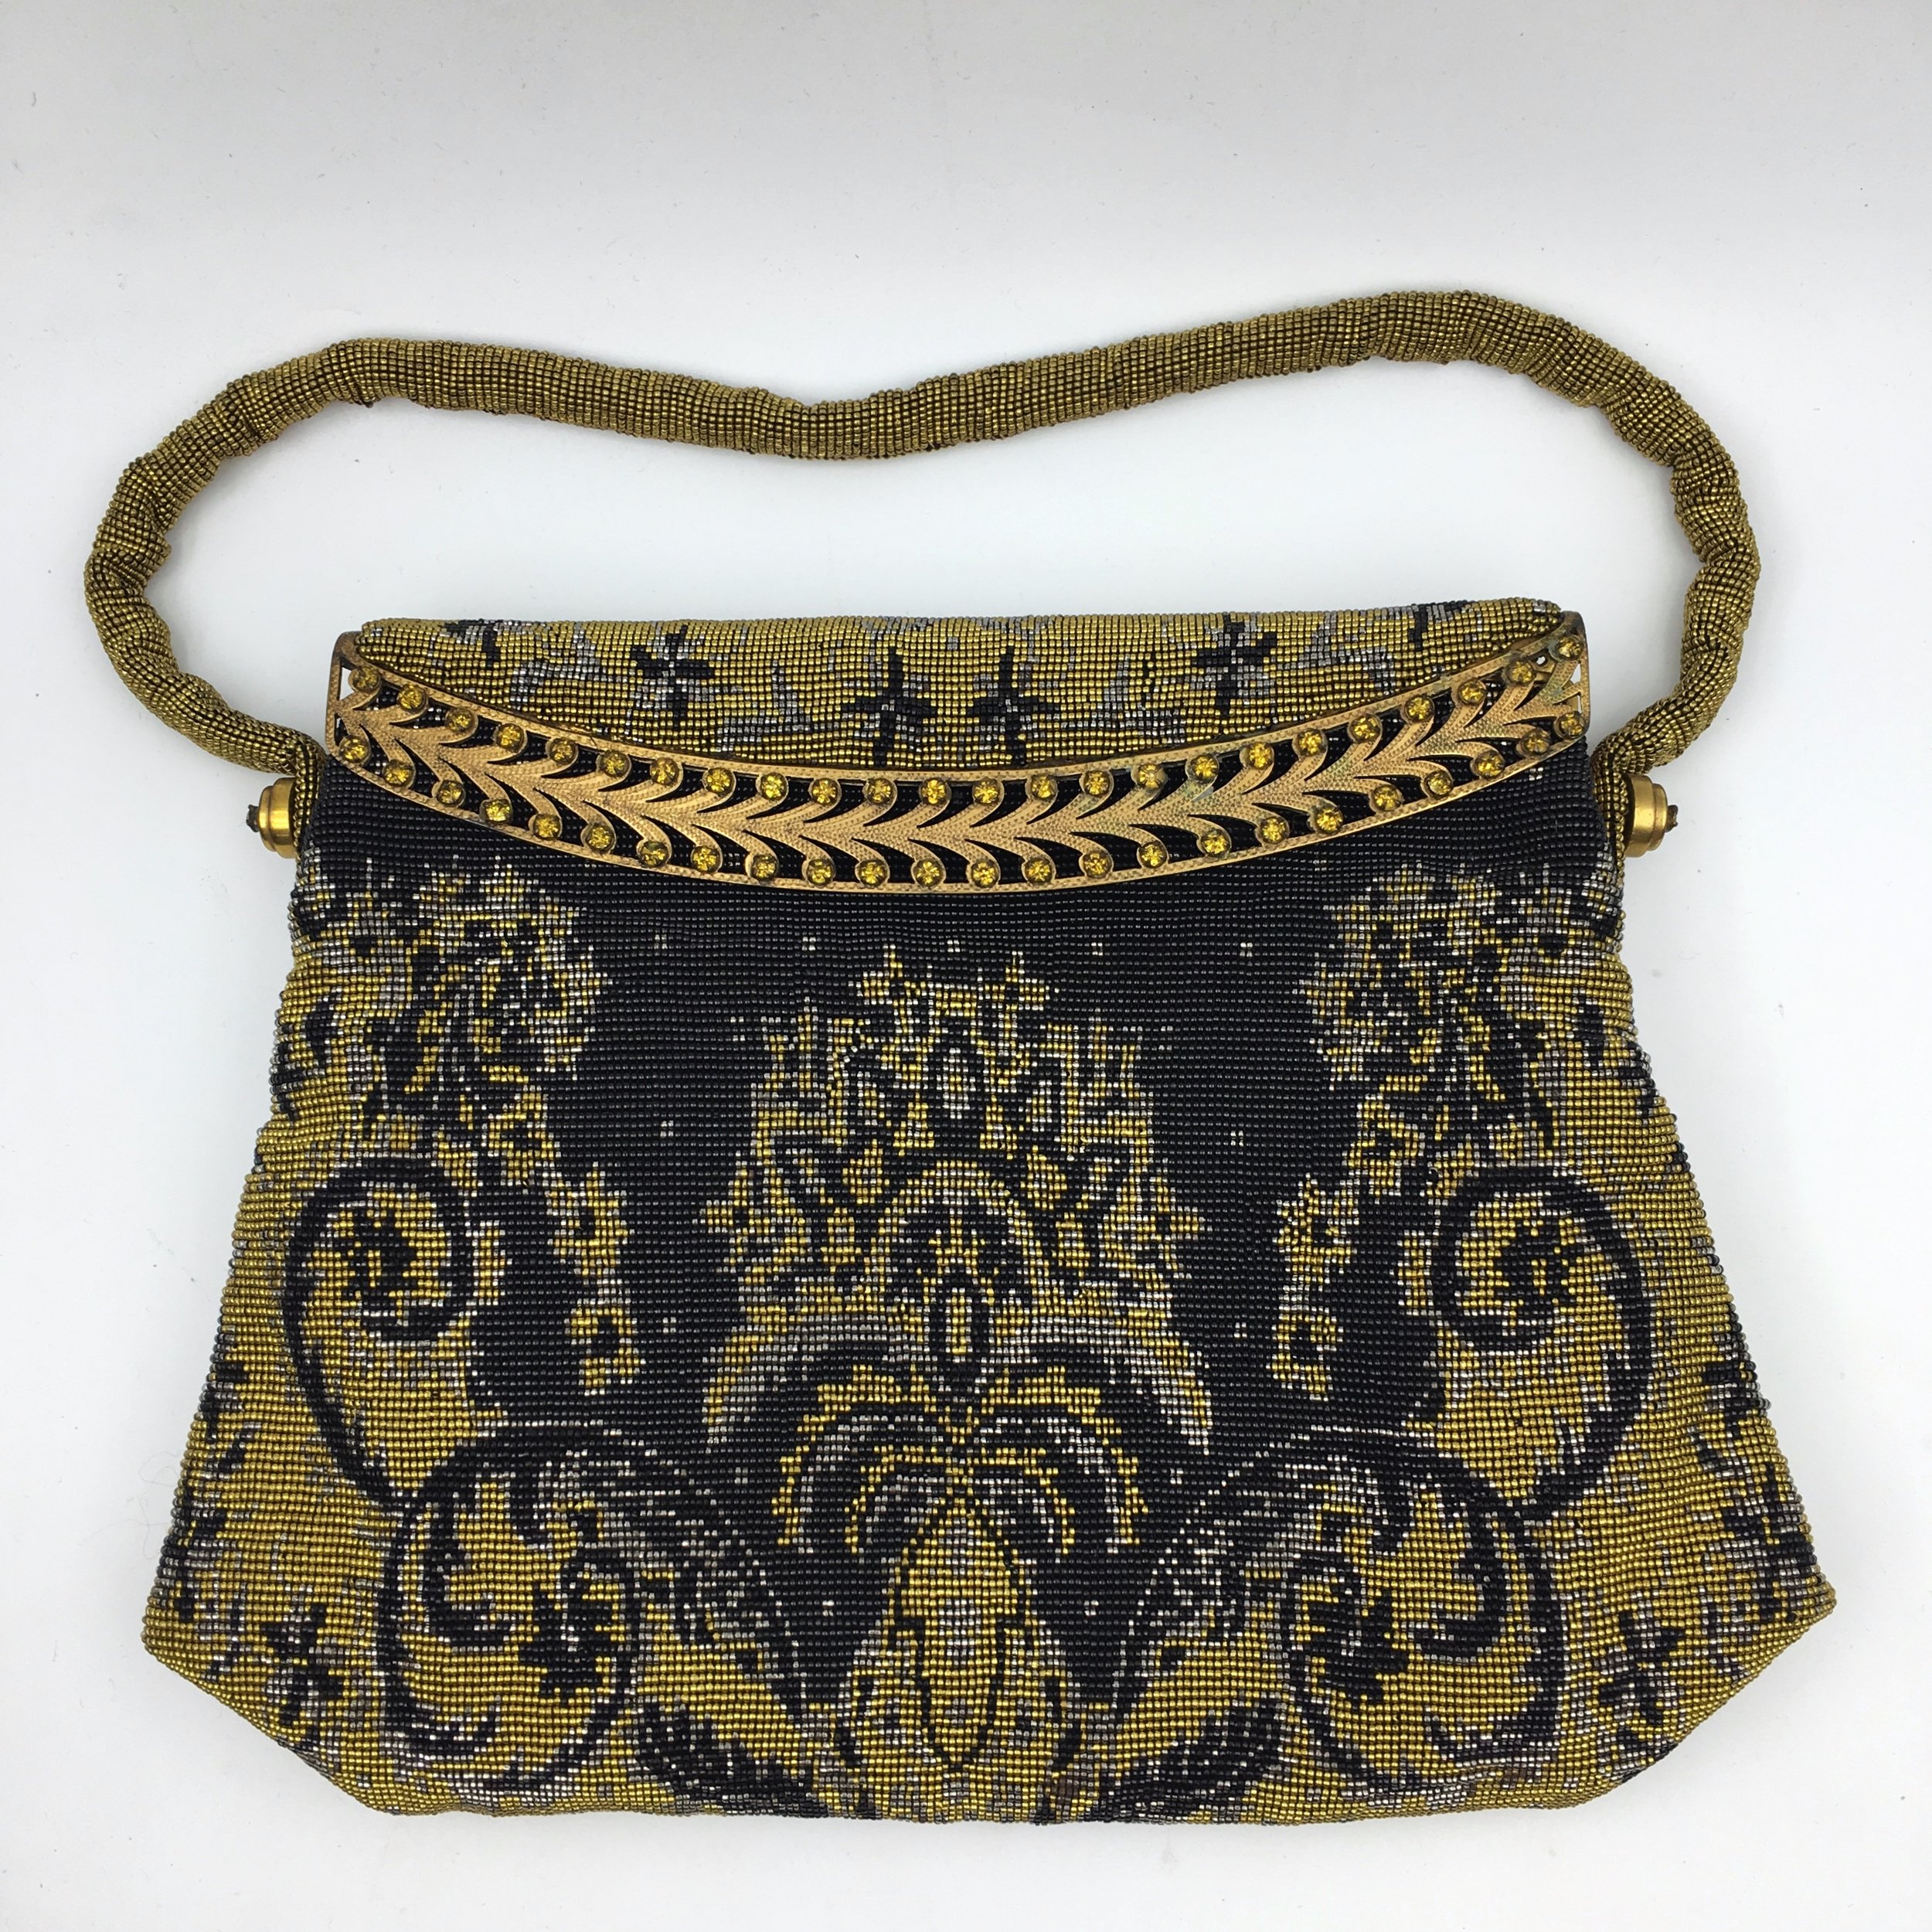 1930s Steel and Glass Beaded Evening Bag, Made in France — Reverie